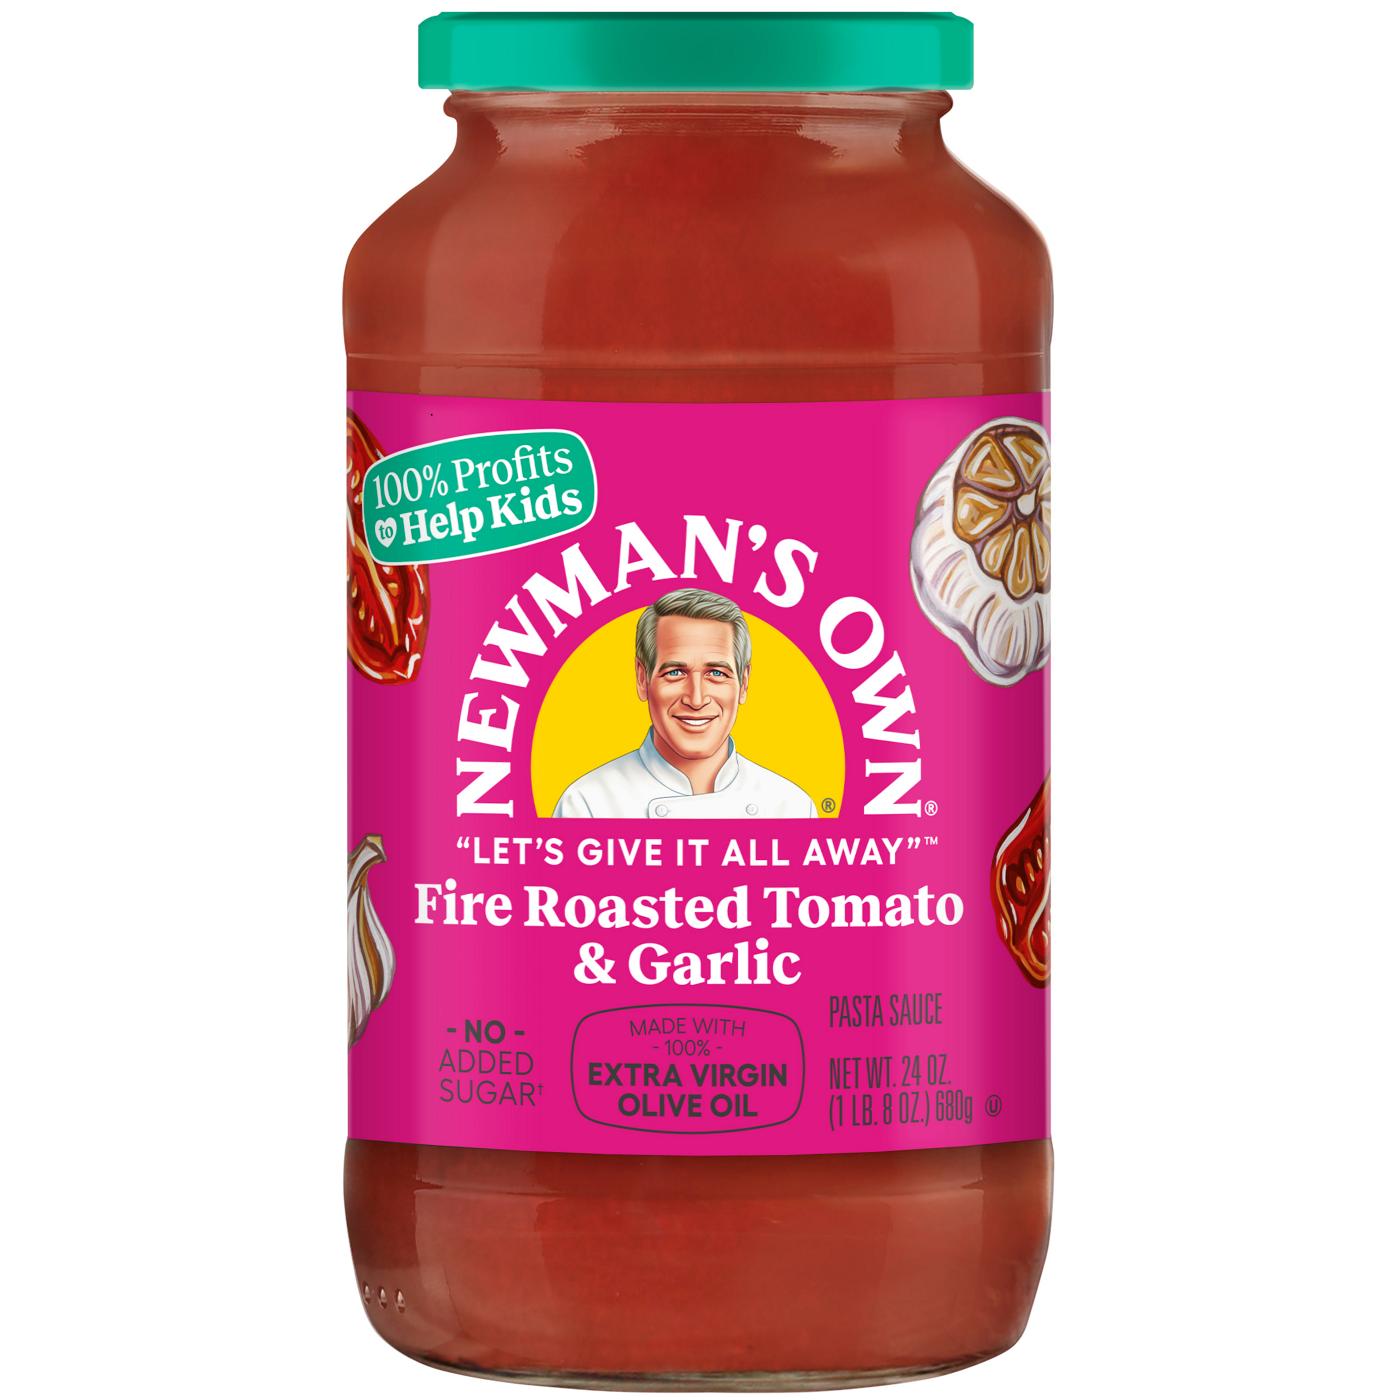 Newman's Own Fire Roasted Tomato & Garlic Pasta Sauce; image 1 of 2